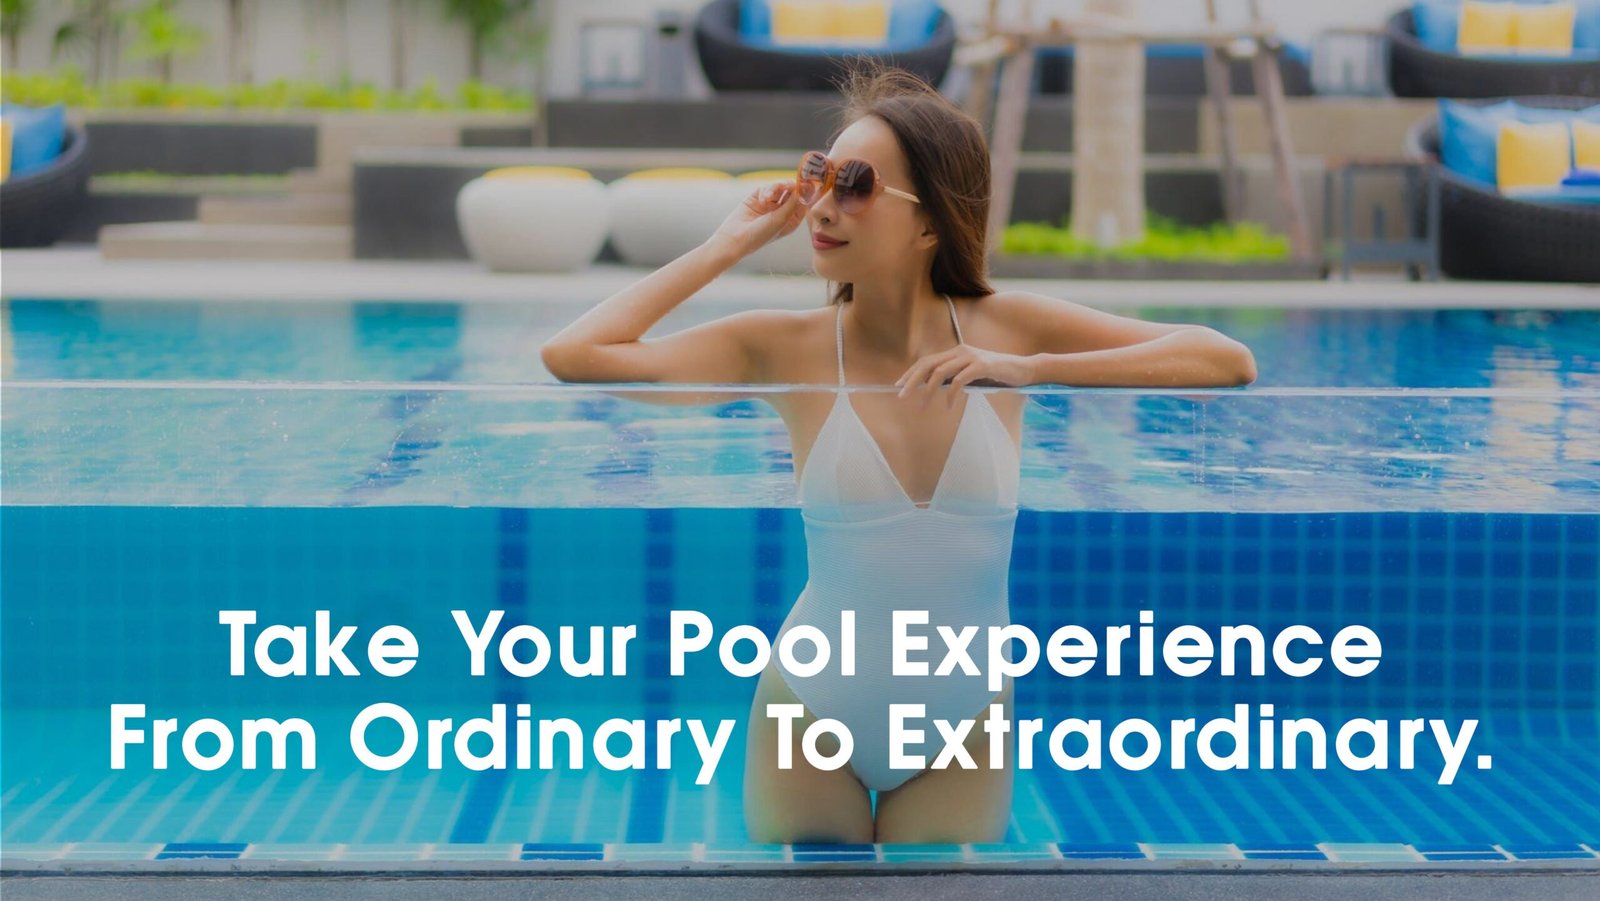 Take Your Pool Experience From Ordinary To Extraordinary